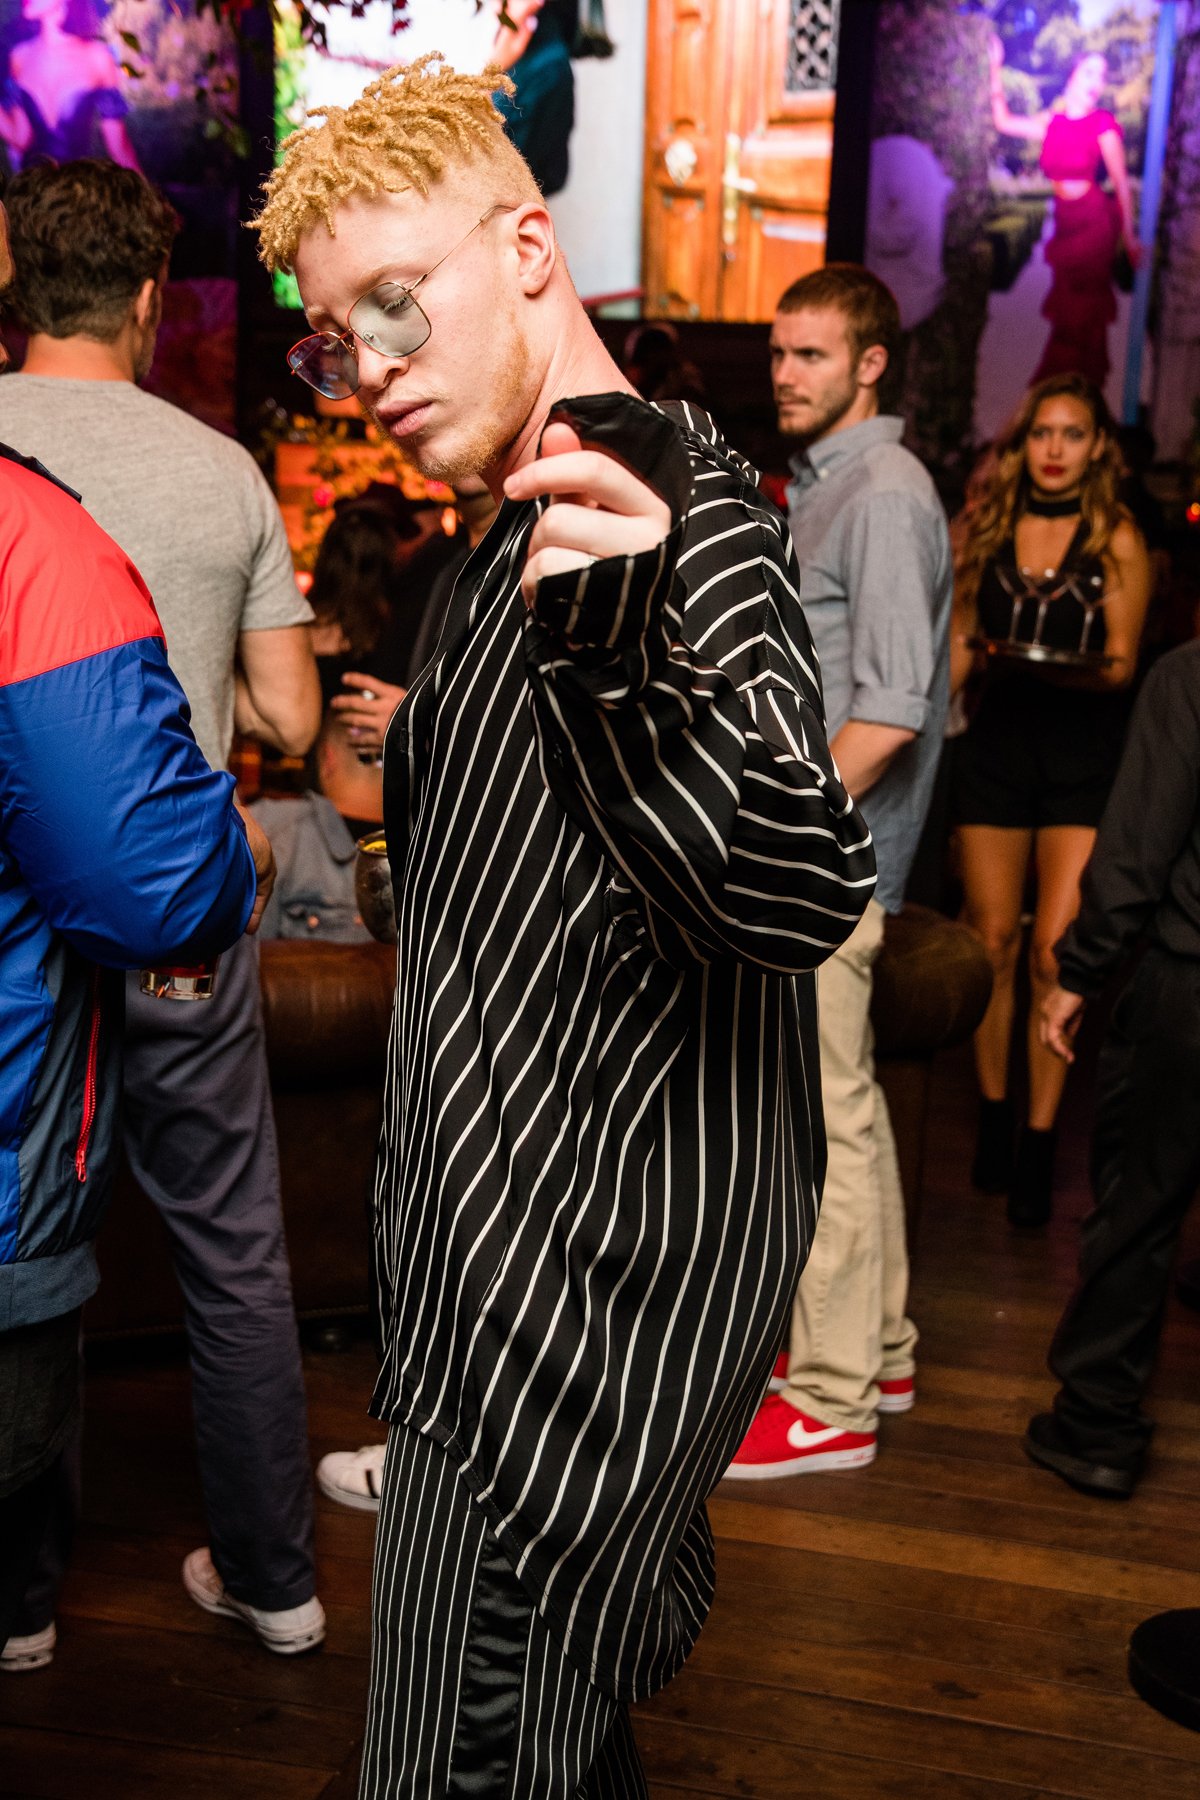 PrettyLittleThing PLT X Olivia Culpo Collection  Celebrity Launch Party Shaun Ross dancing.jpg